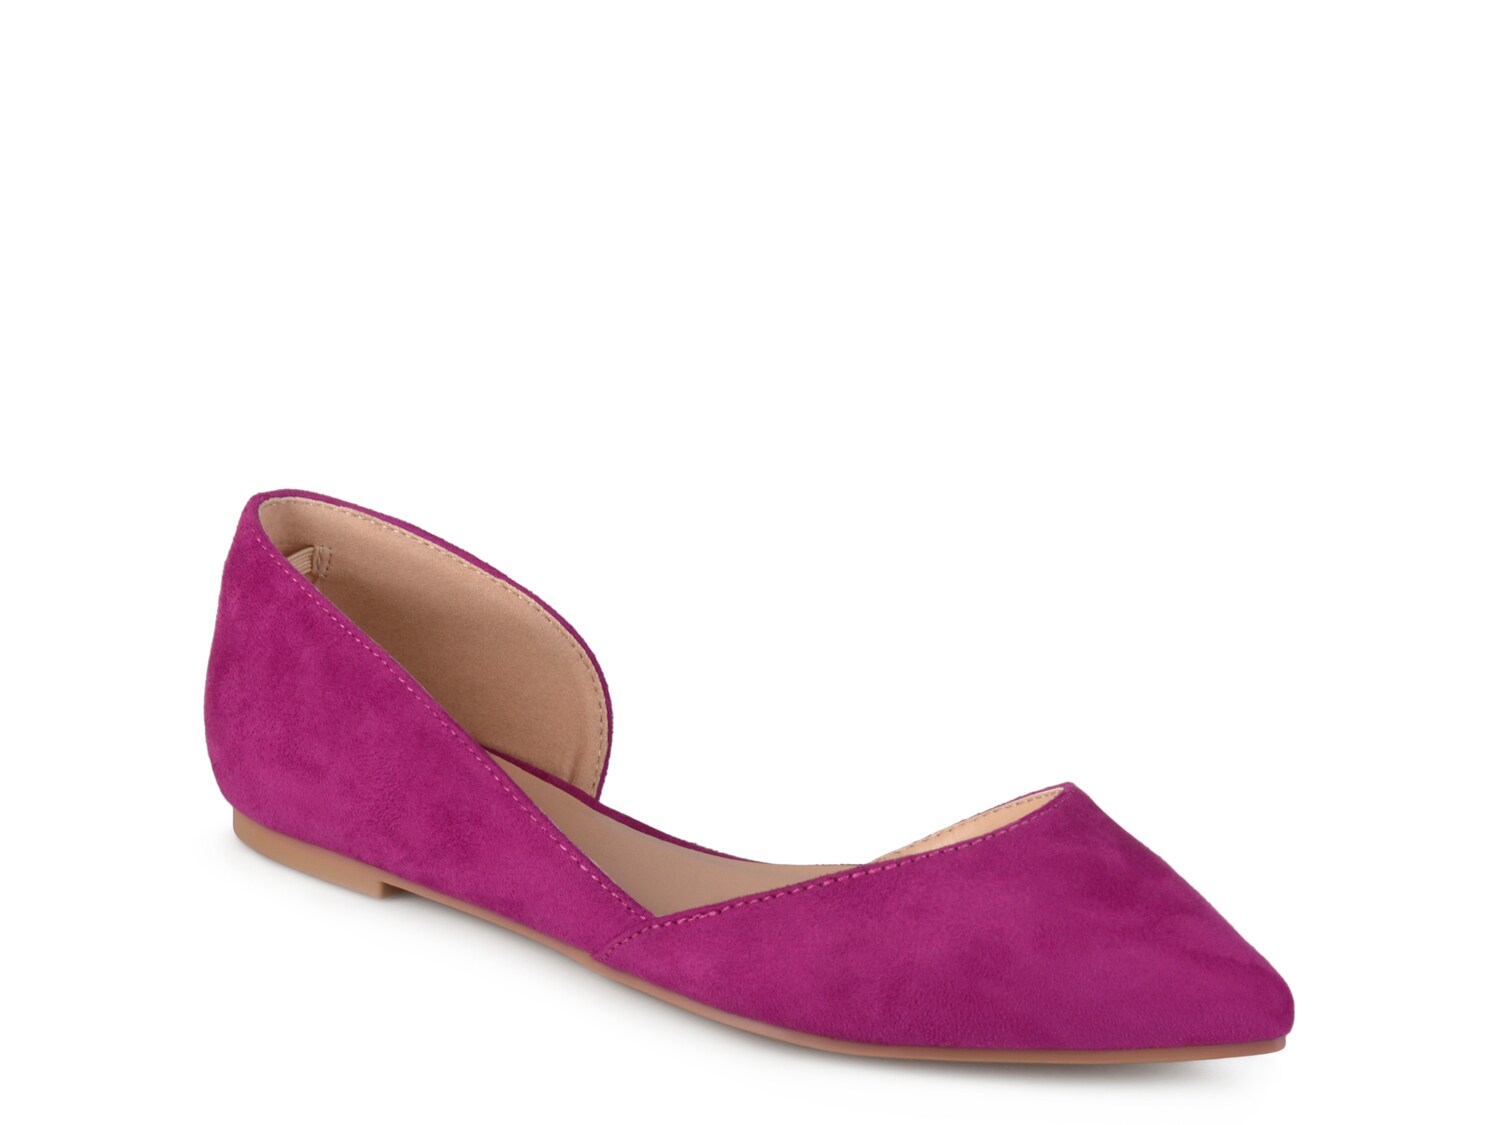 Journee Collection Ester Flat - Free Shipping | DSW